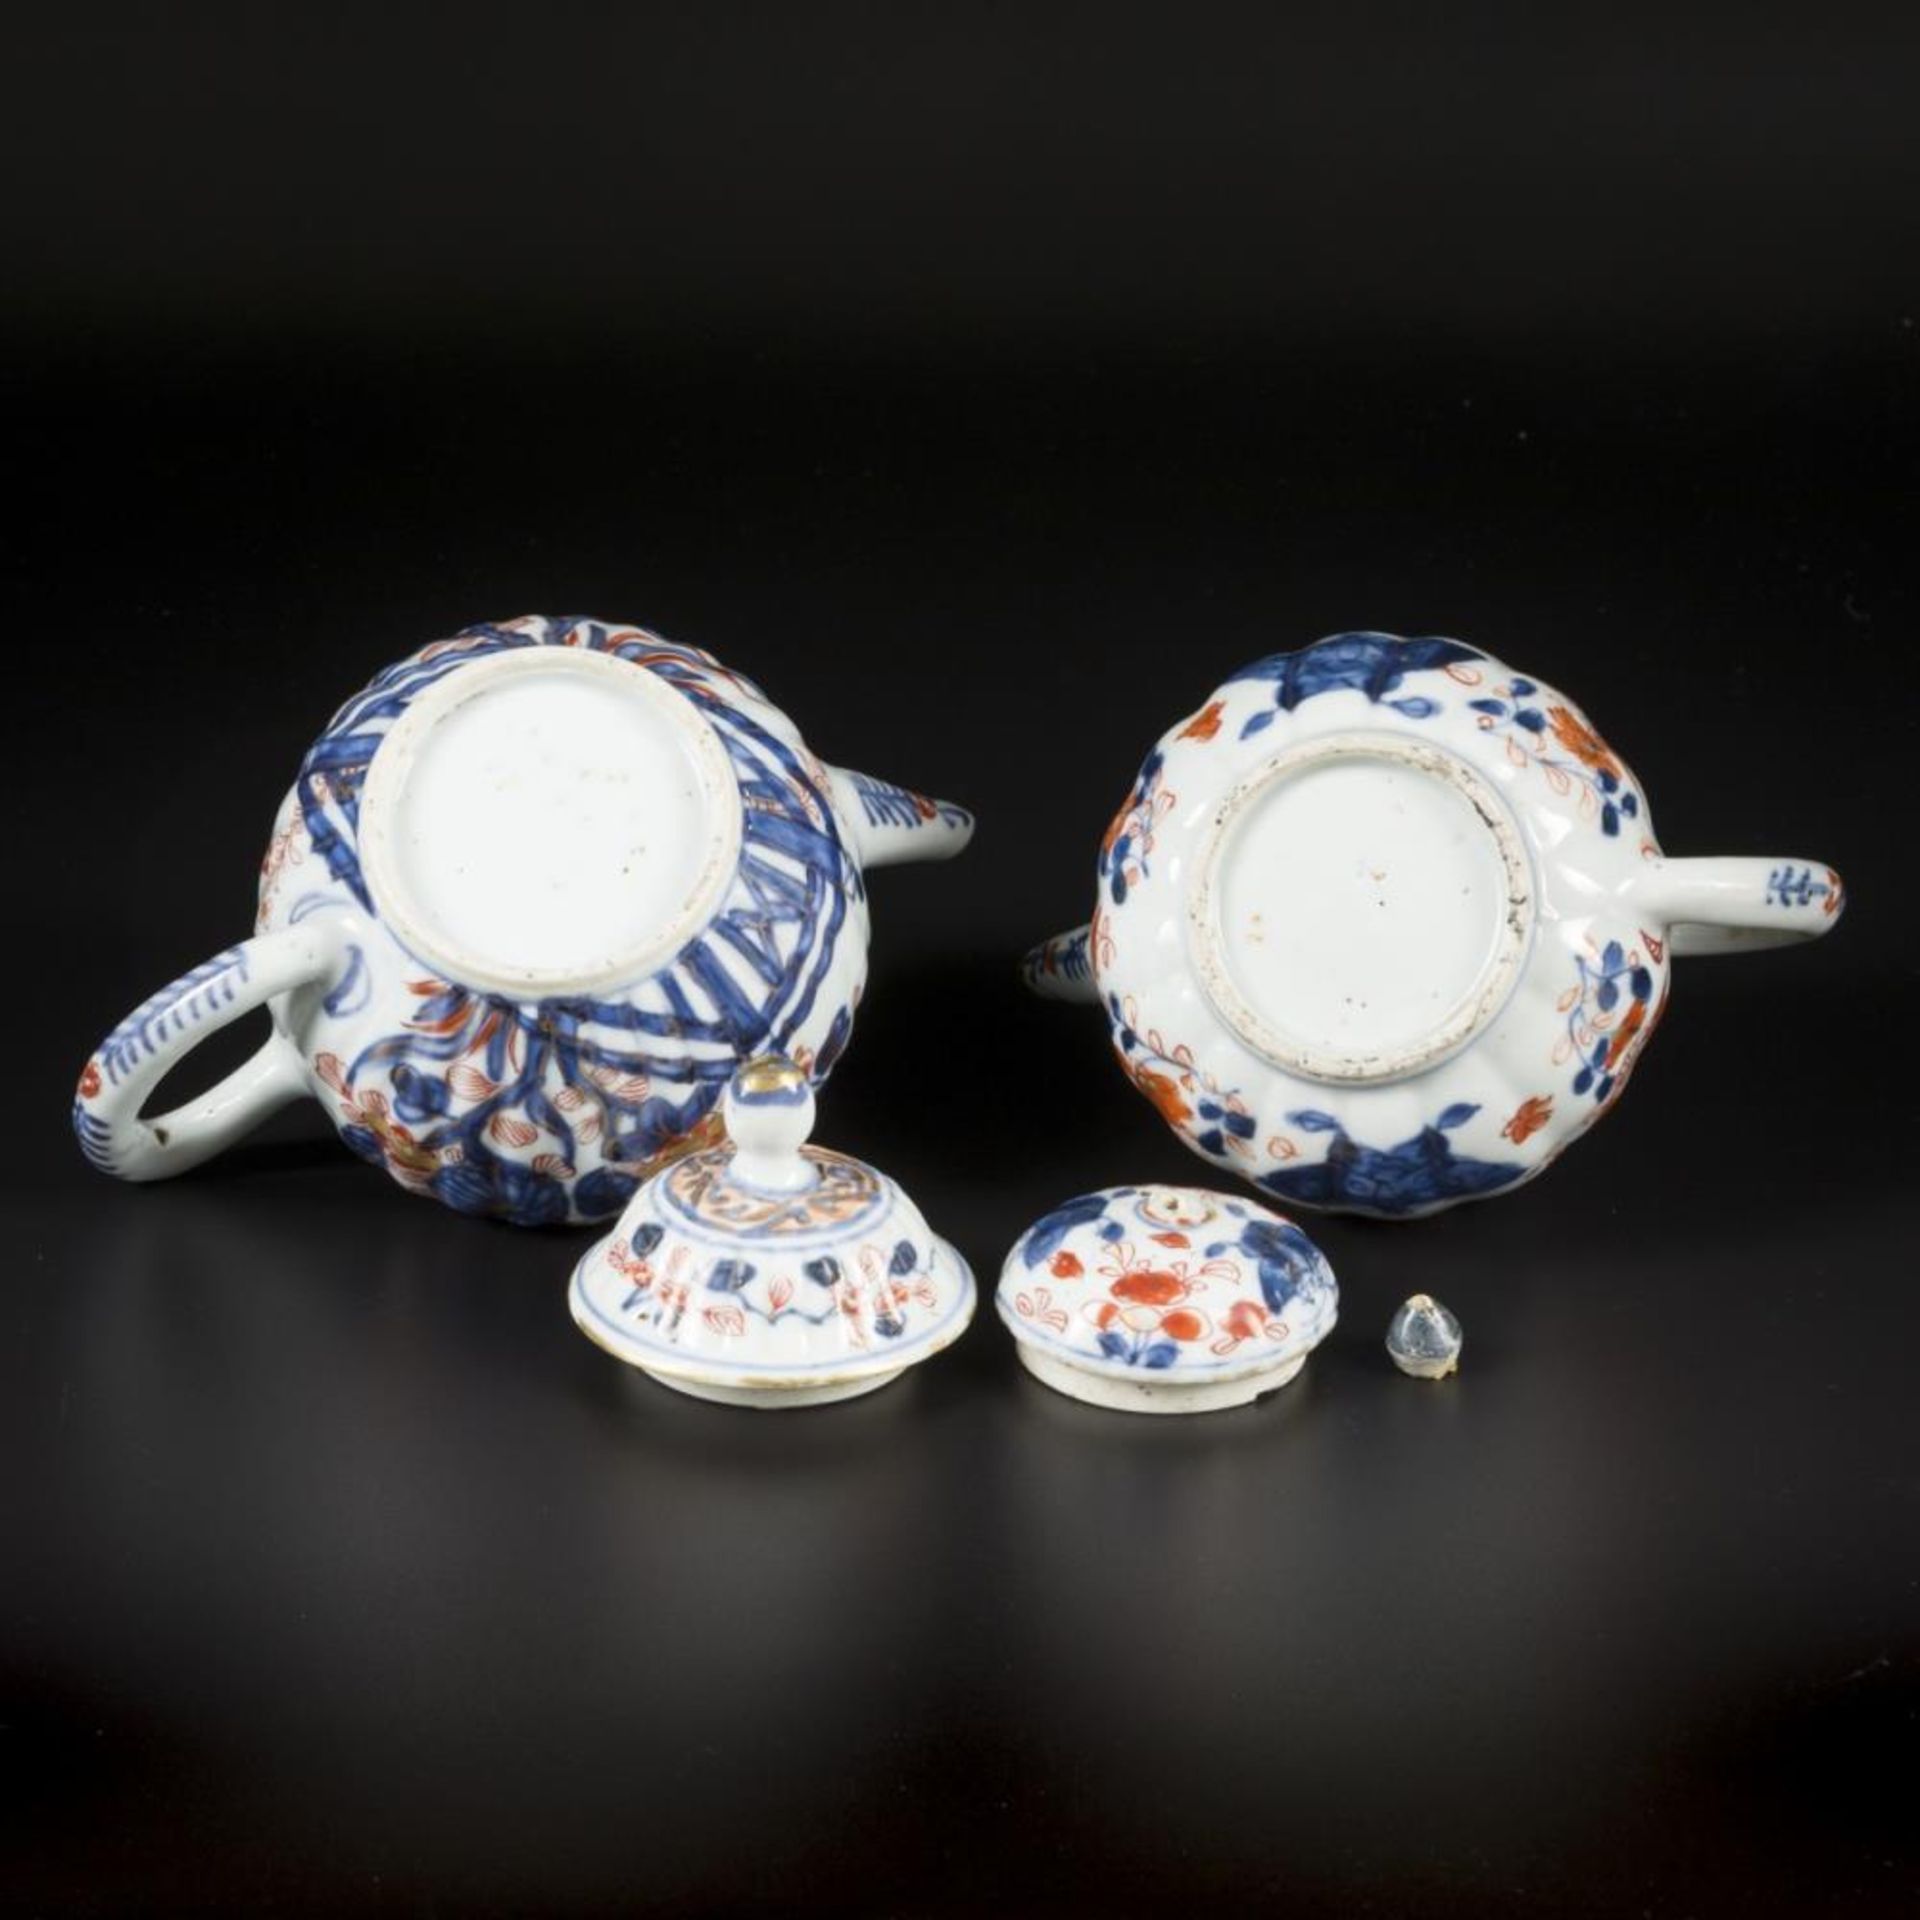 A lot of (2) porcelain teapots with Imari decoration. China, 18th century. - Image 12 of 12